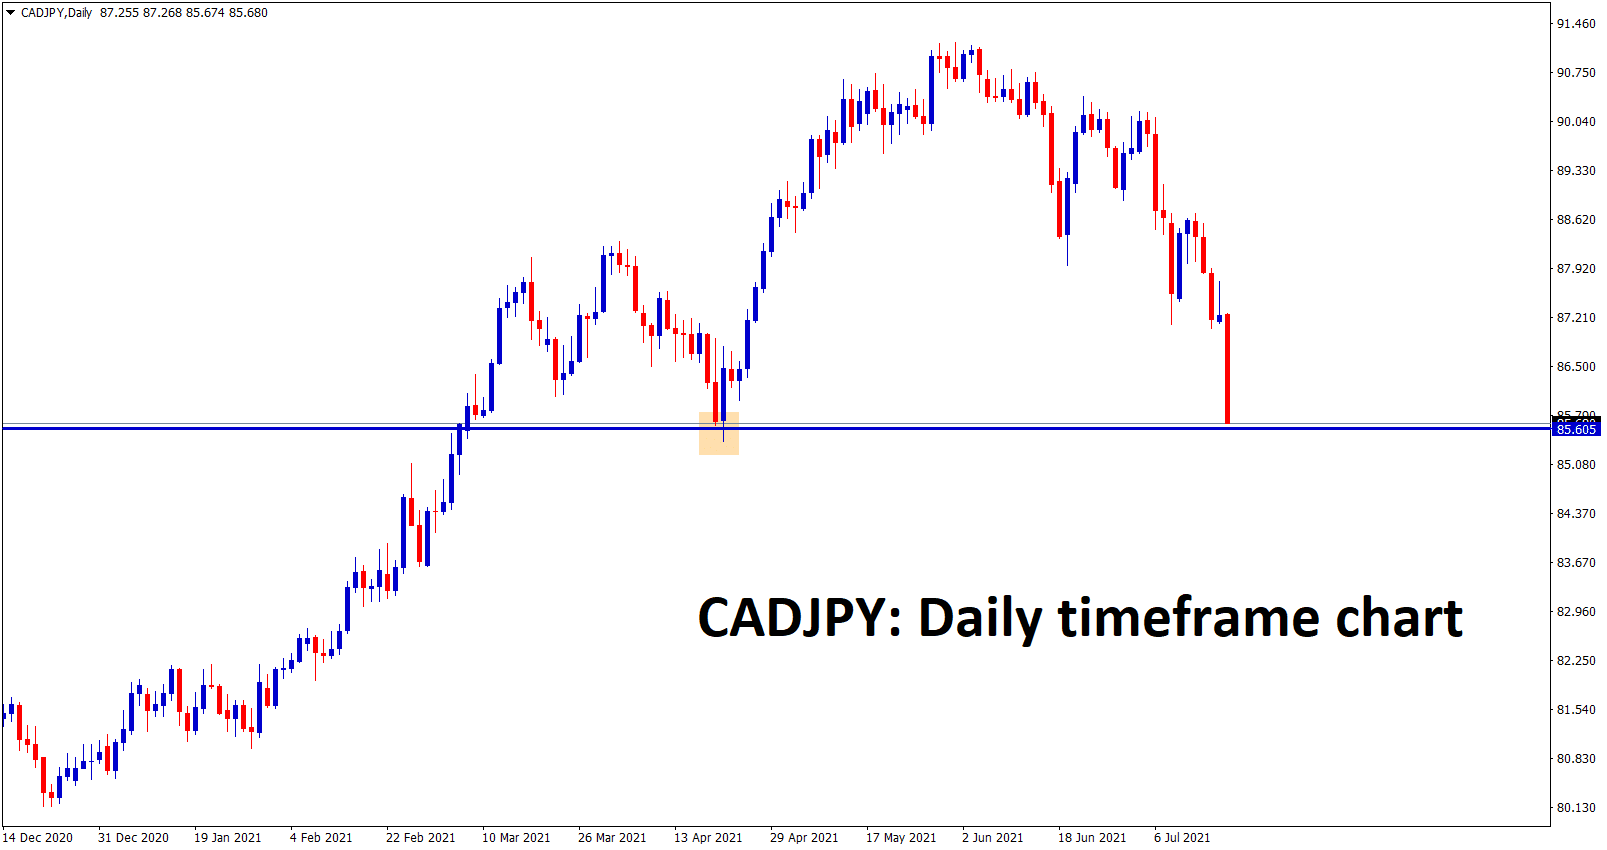 CADJPY going to reach the support area.